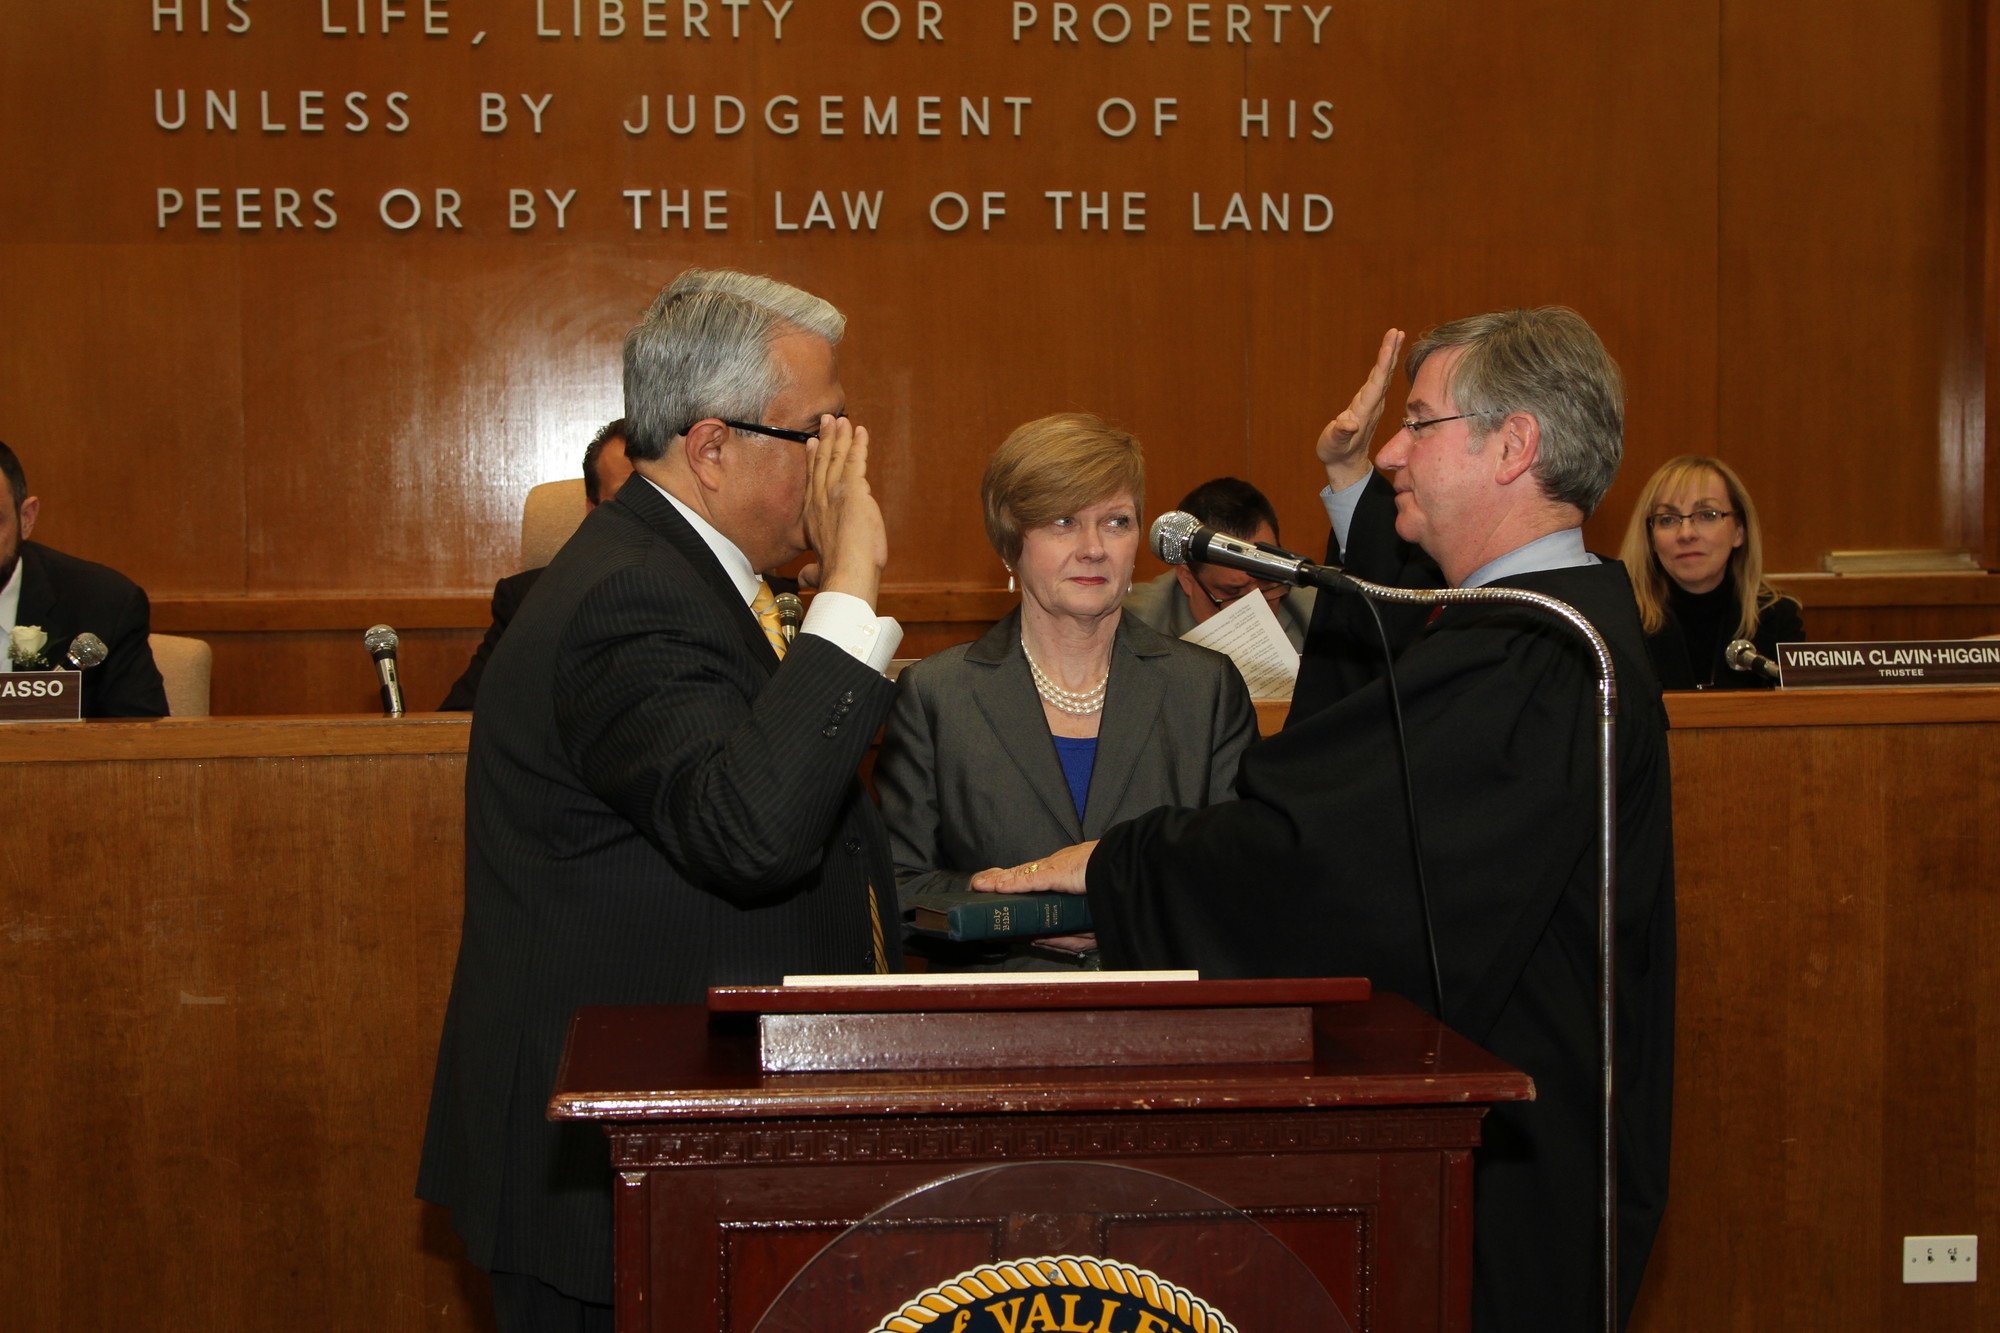 Village Justice Robert Bogle, right, was installed by Hempstead Town Councilman Anthony Santino. Bogle’s wife, Kathy, is behind them.